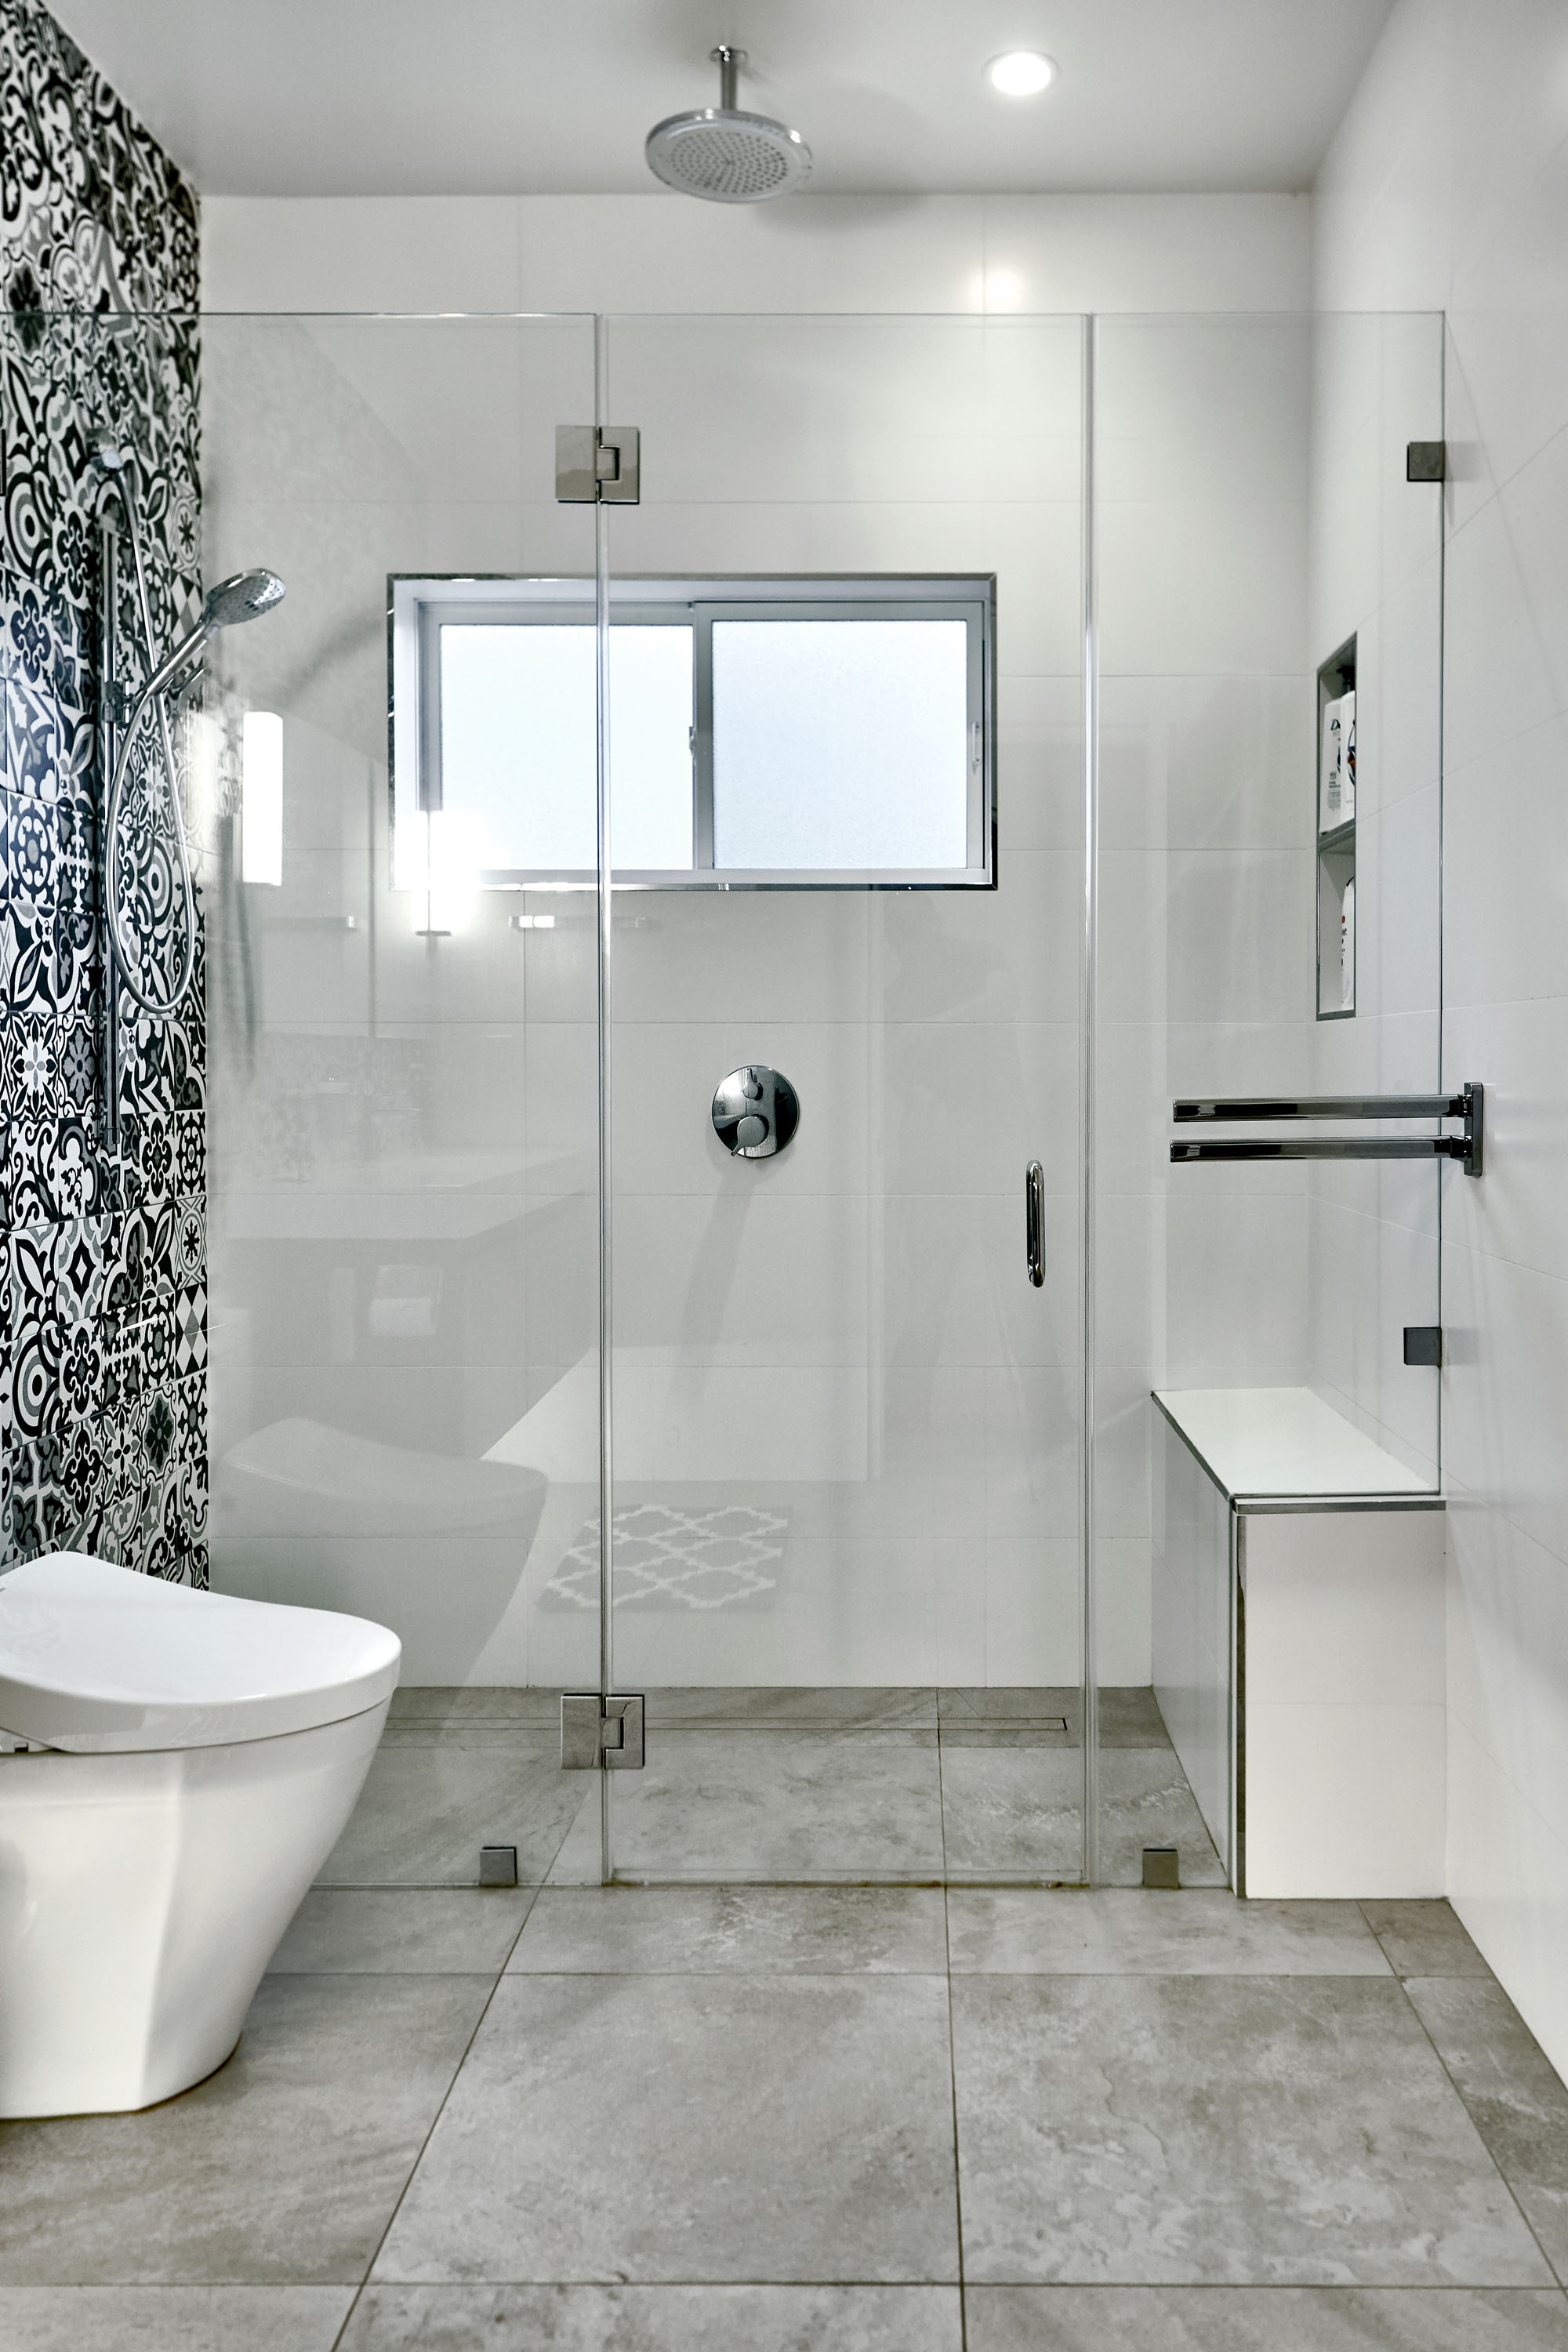 CURBLESS SHOWERS FOR EASY ACCESS.